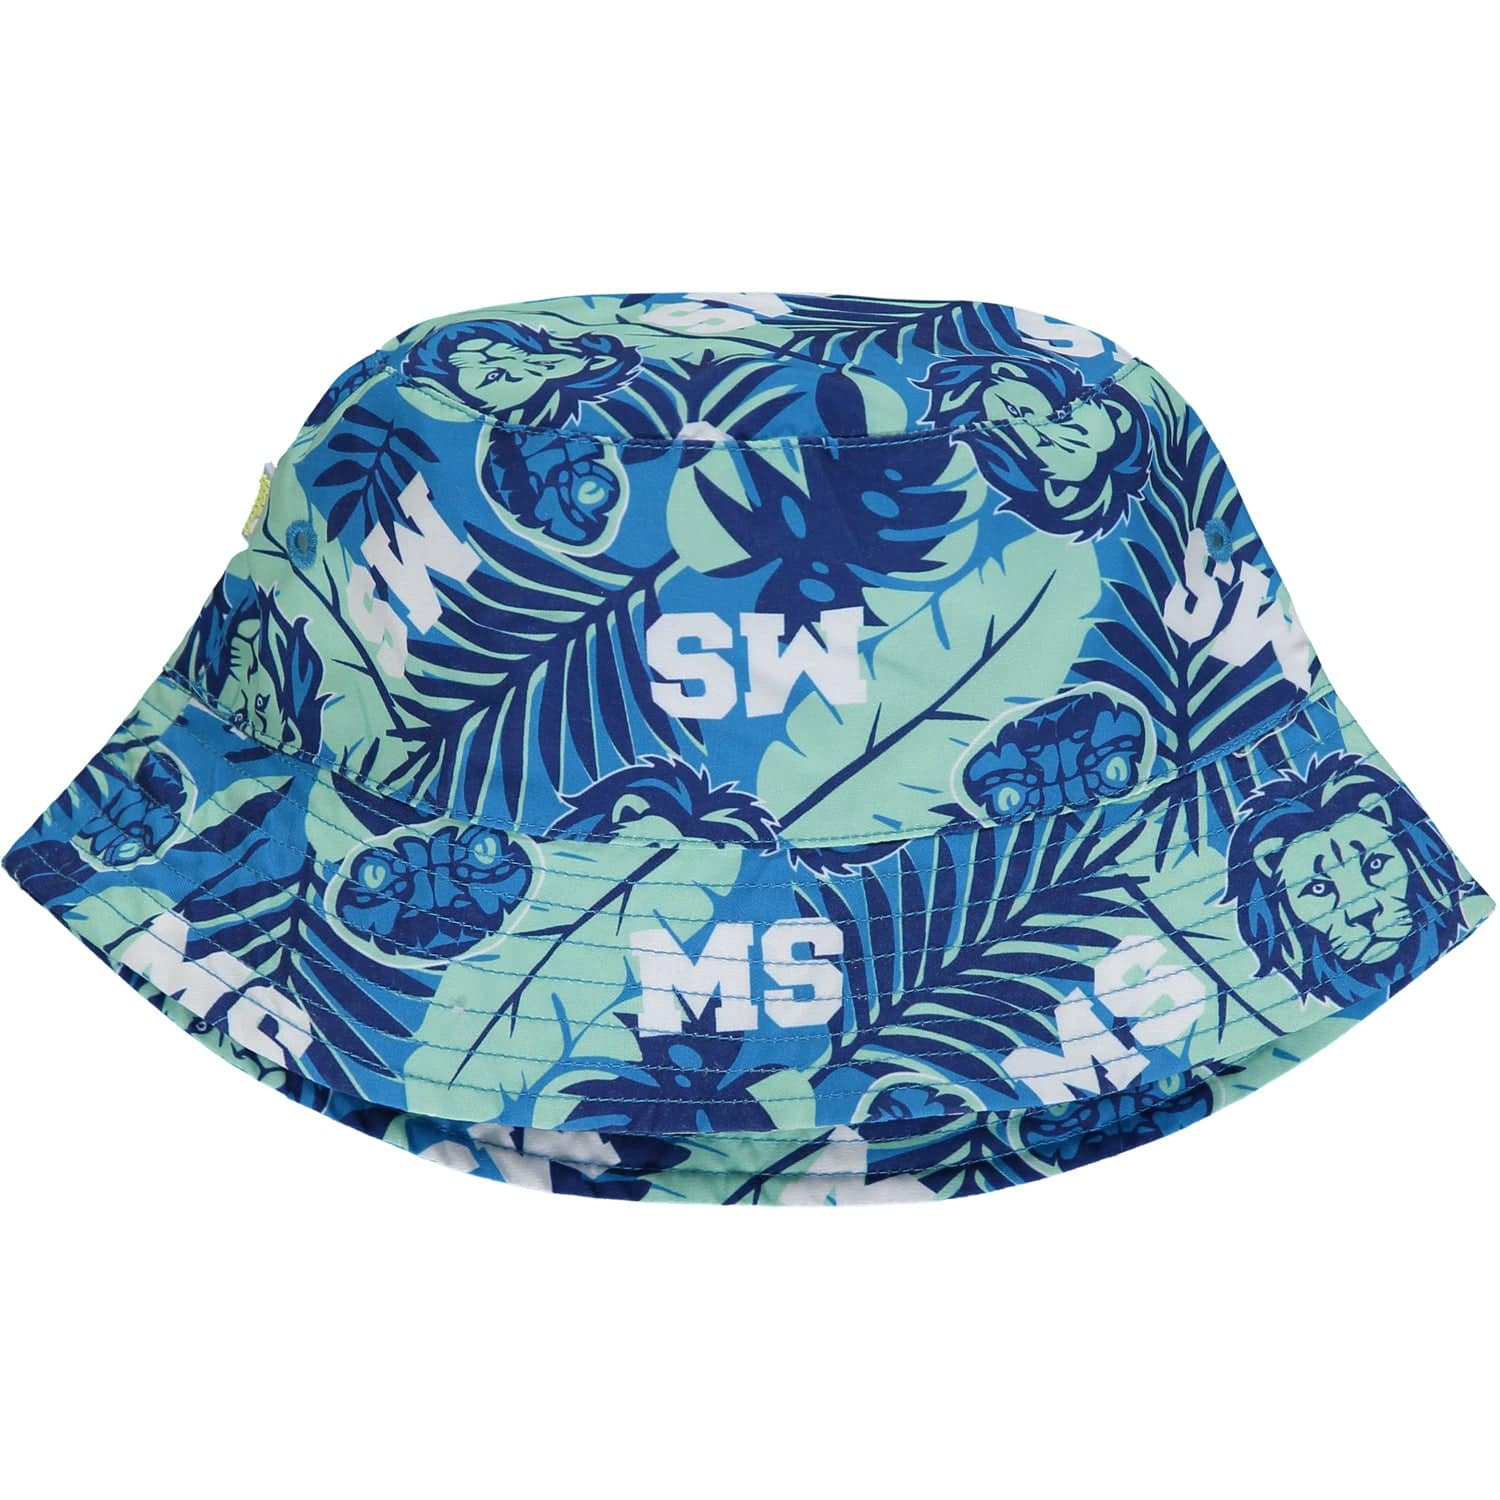 MITCH & SON - Kai King Of The Jungle Bucket Hat - Bright Blue